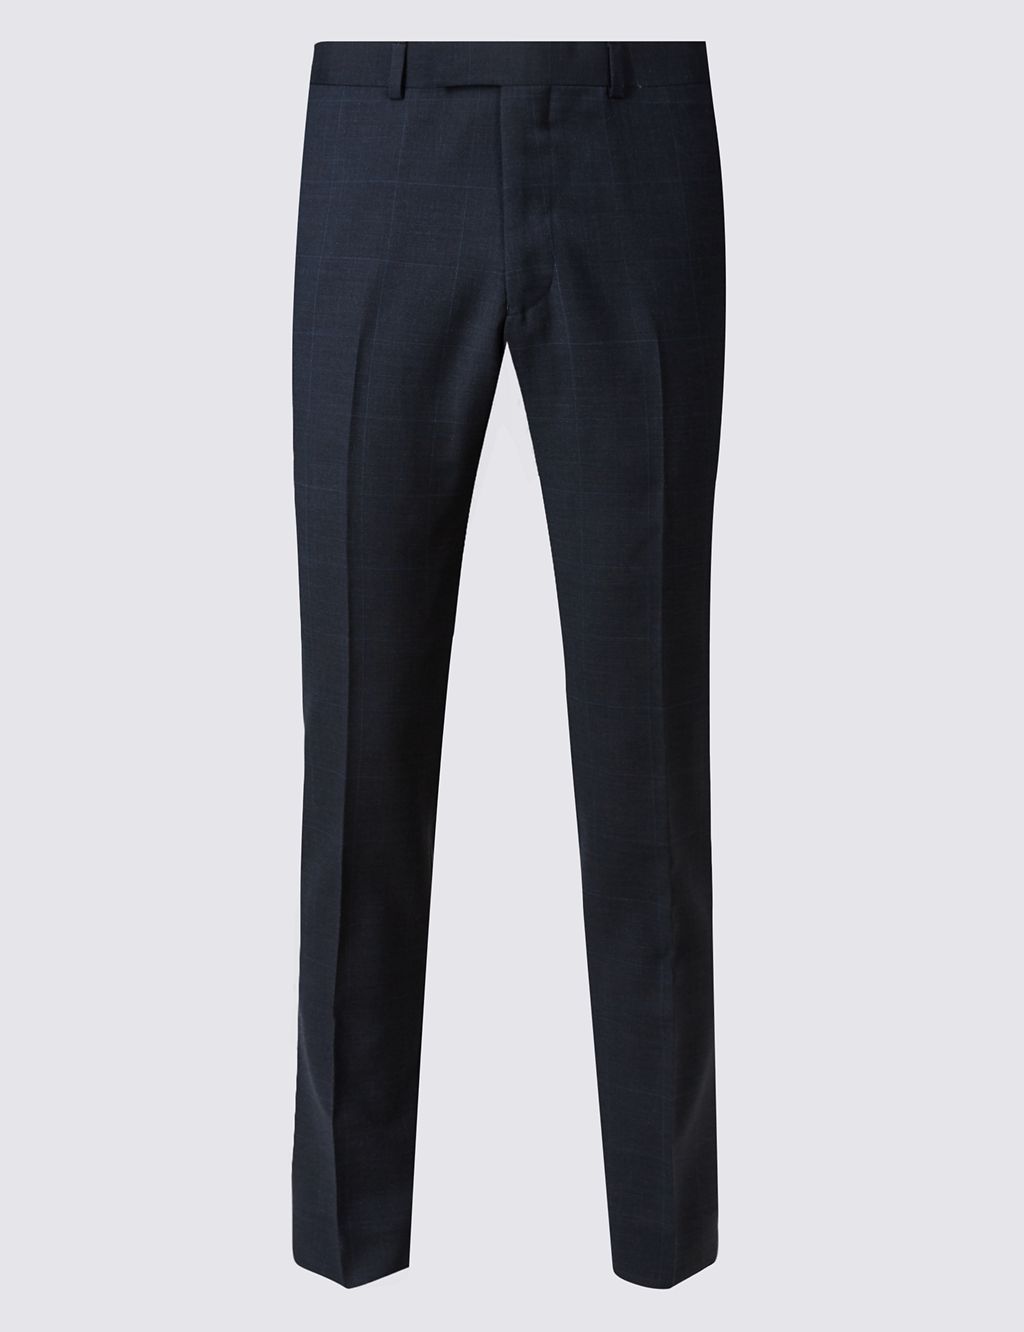 Navy Checked Slim Fit Wool Trousers 1 of 6